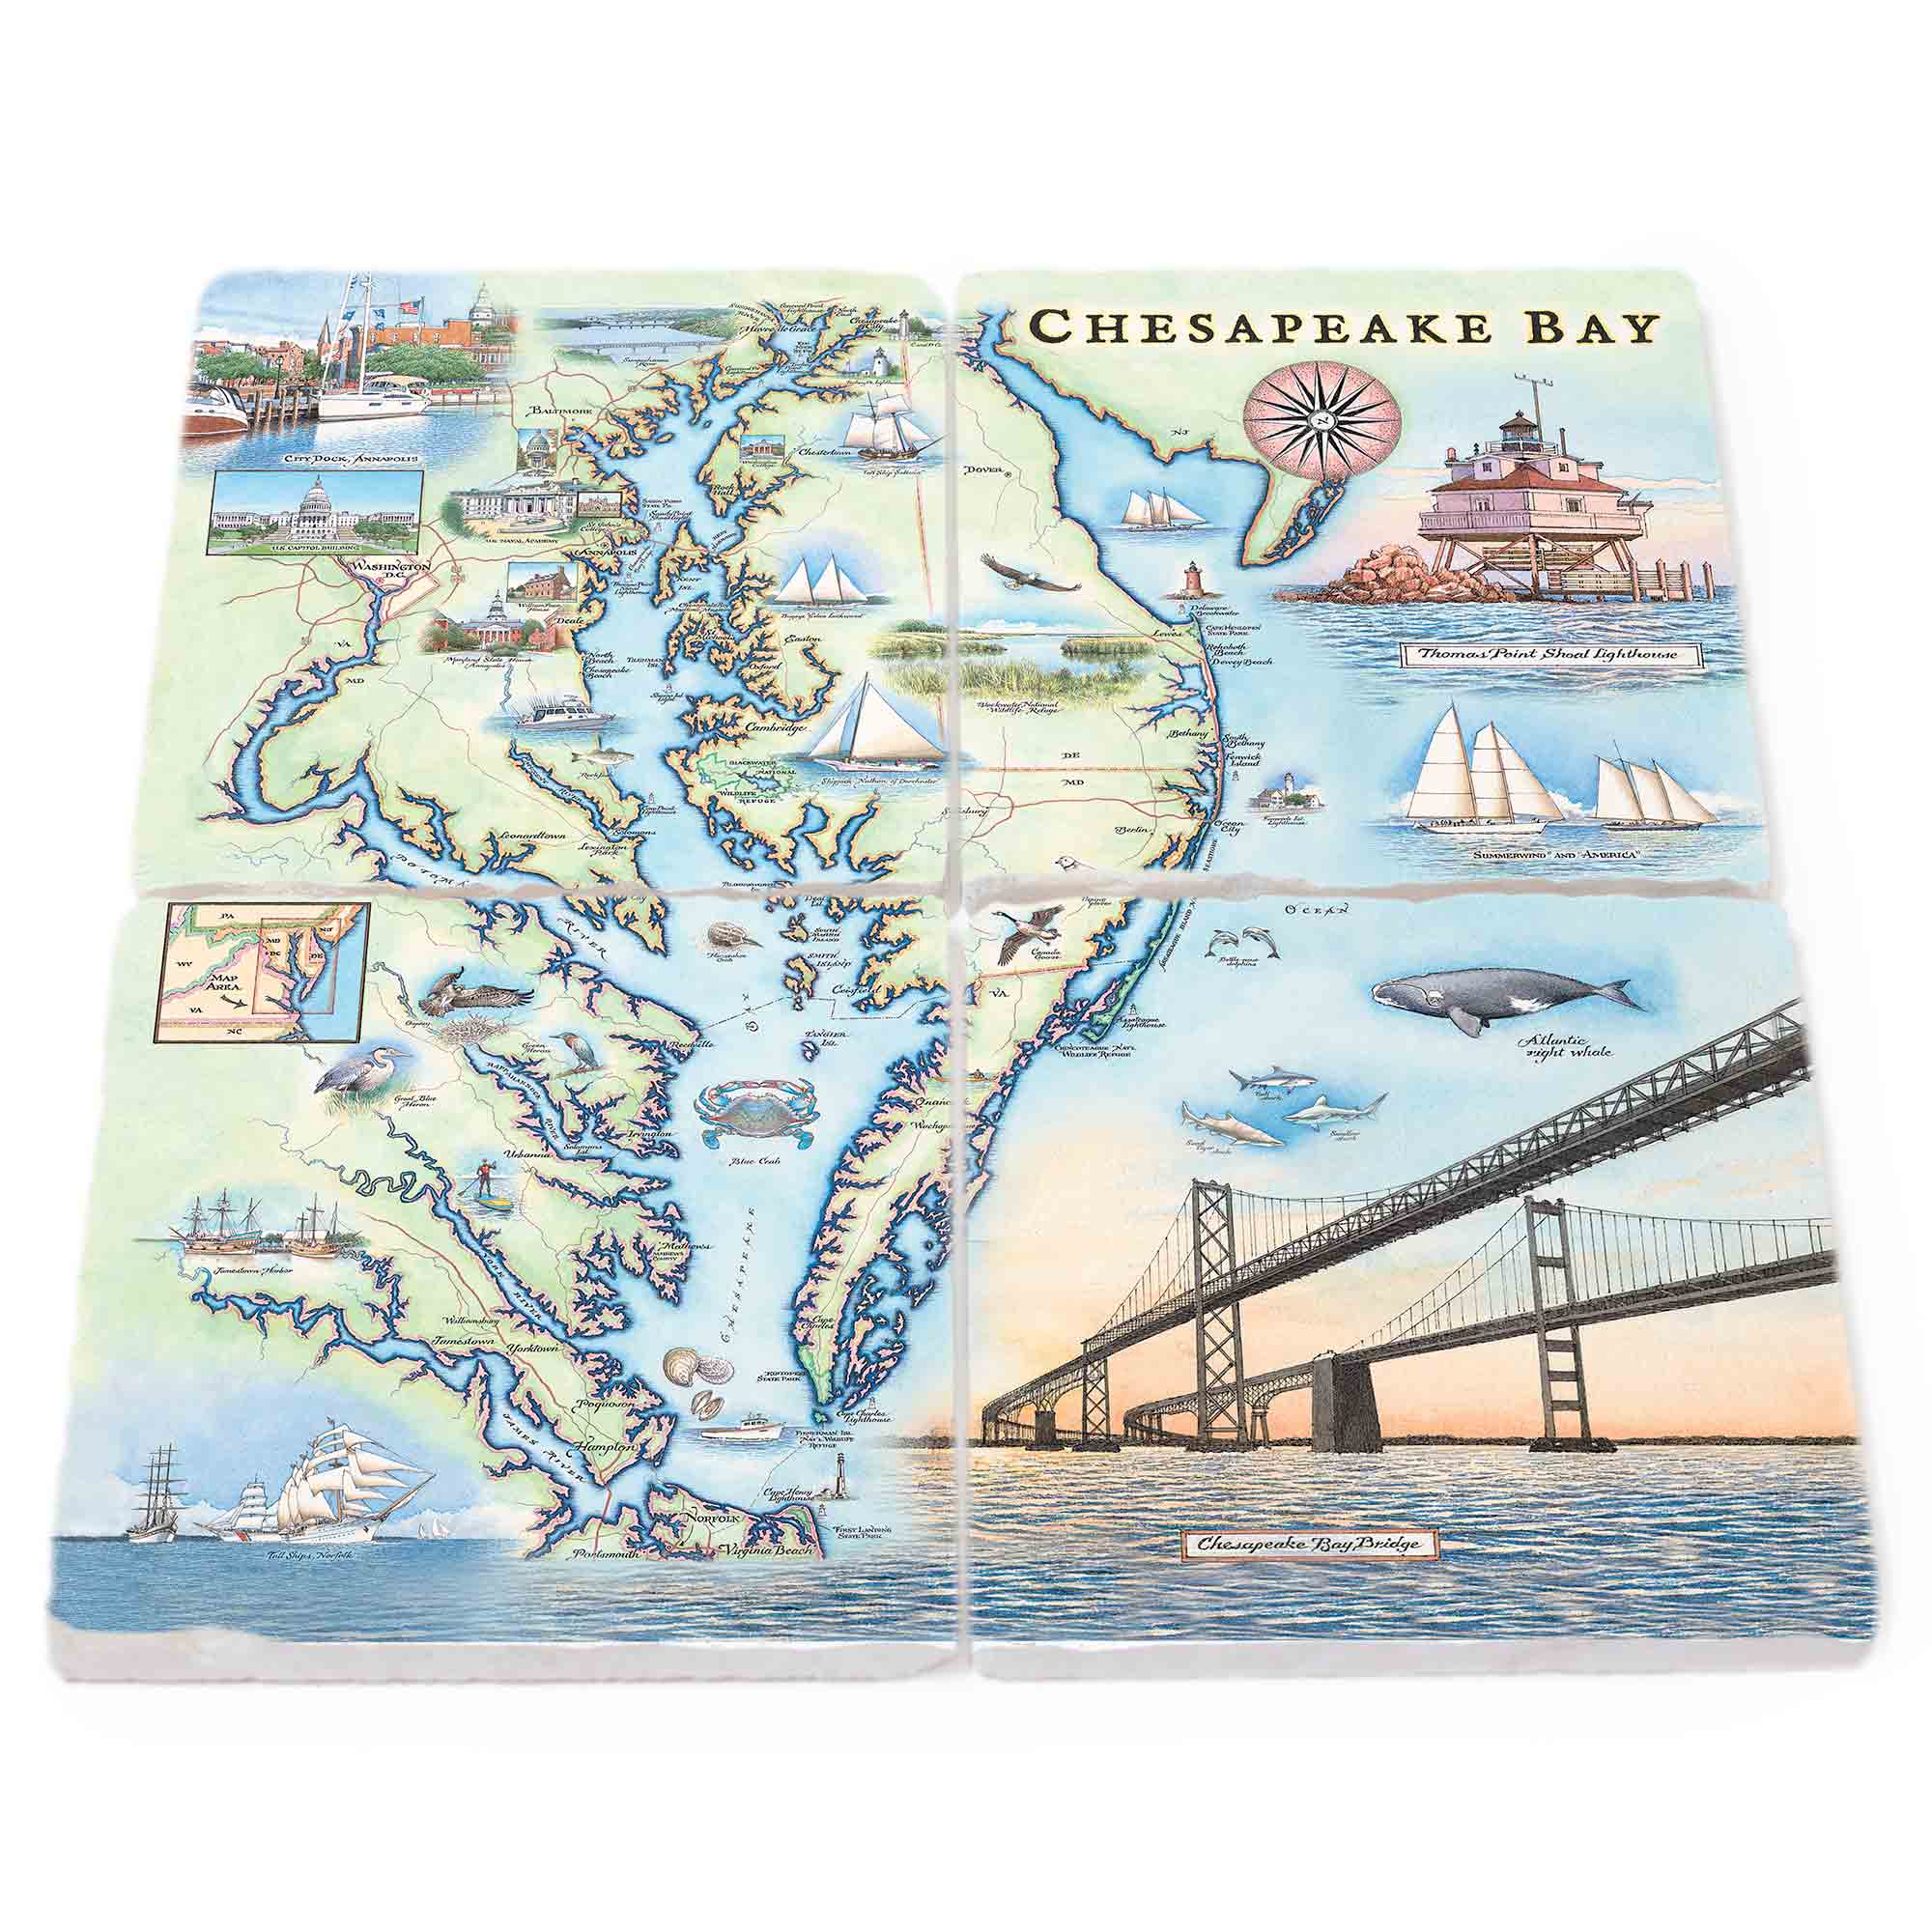 Chesapeake Bay Natural Stone Coasters in shades of blue, green, and tan. The design showcases Thomas Point Shoal Lighthouse, boats, whales, sharks, and dolphins, capturing the maritime essence of the bay. Explore City Dock Annapolis, the US State Capitol, and the beauty of birds in this coastal-inspired collection.